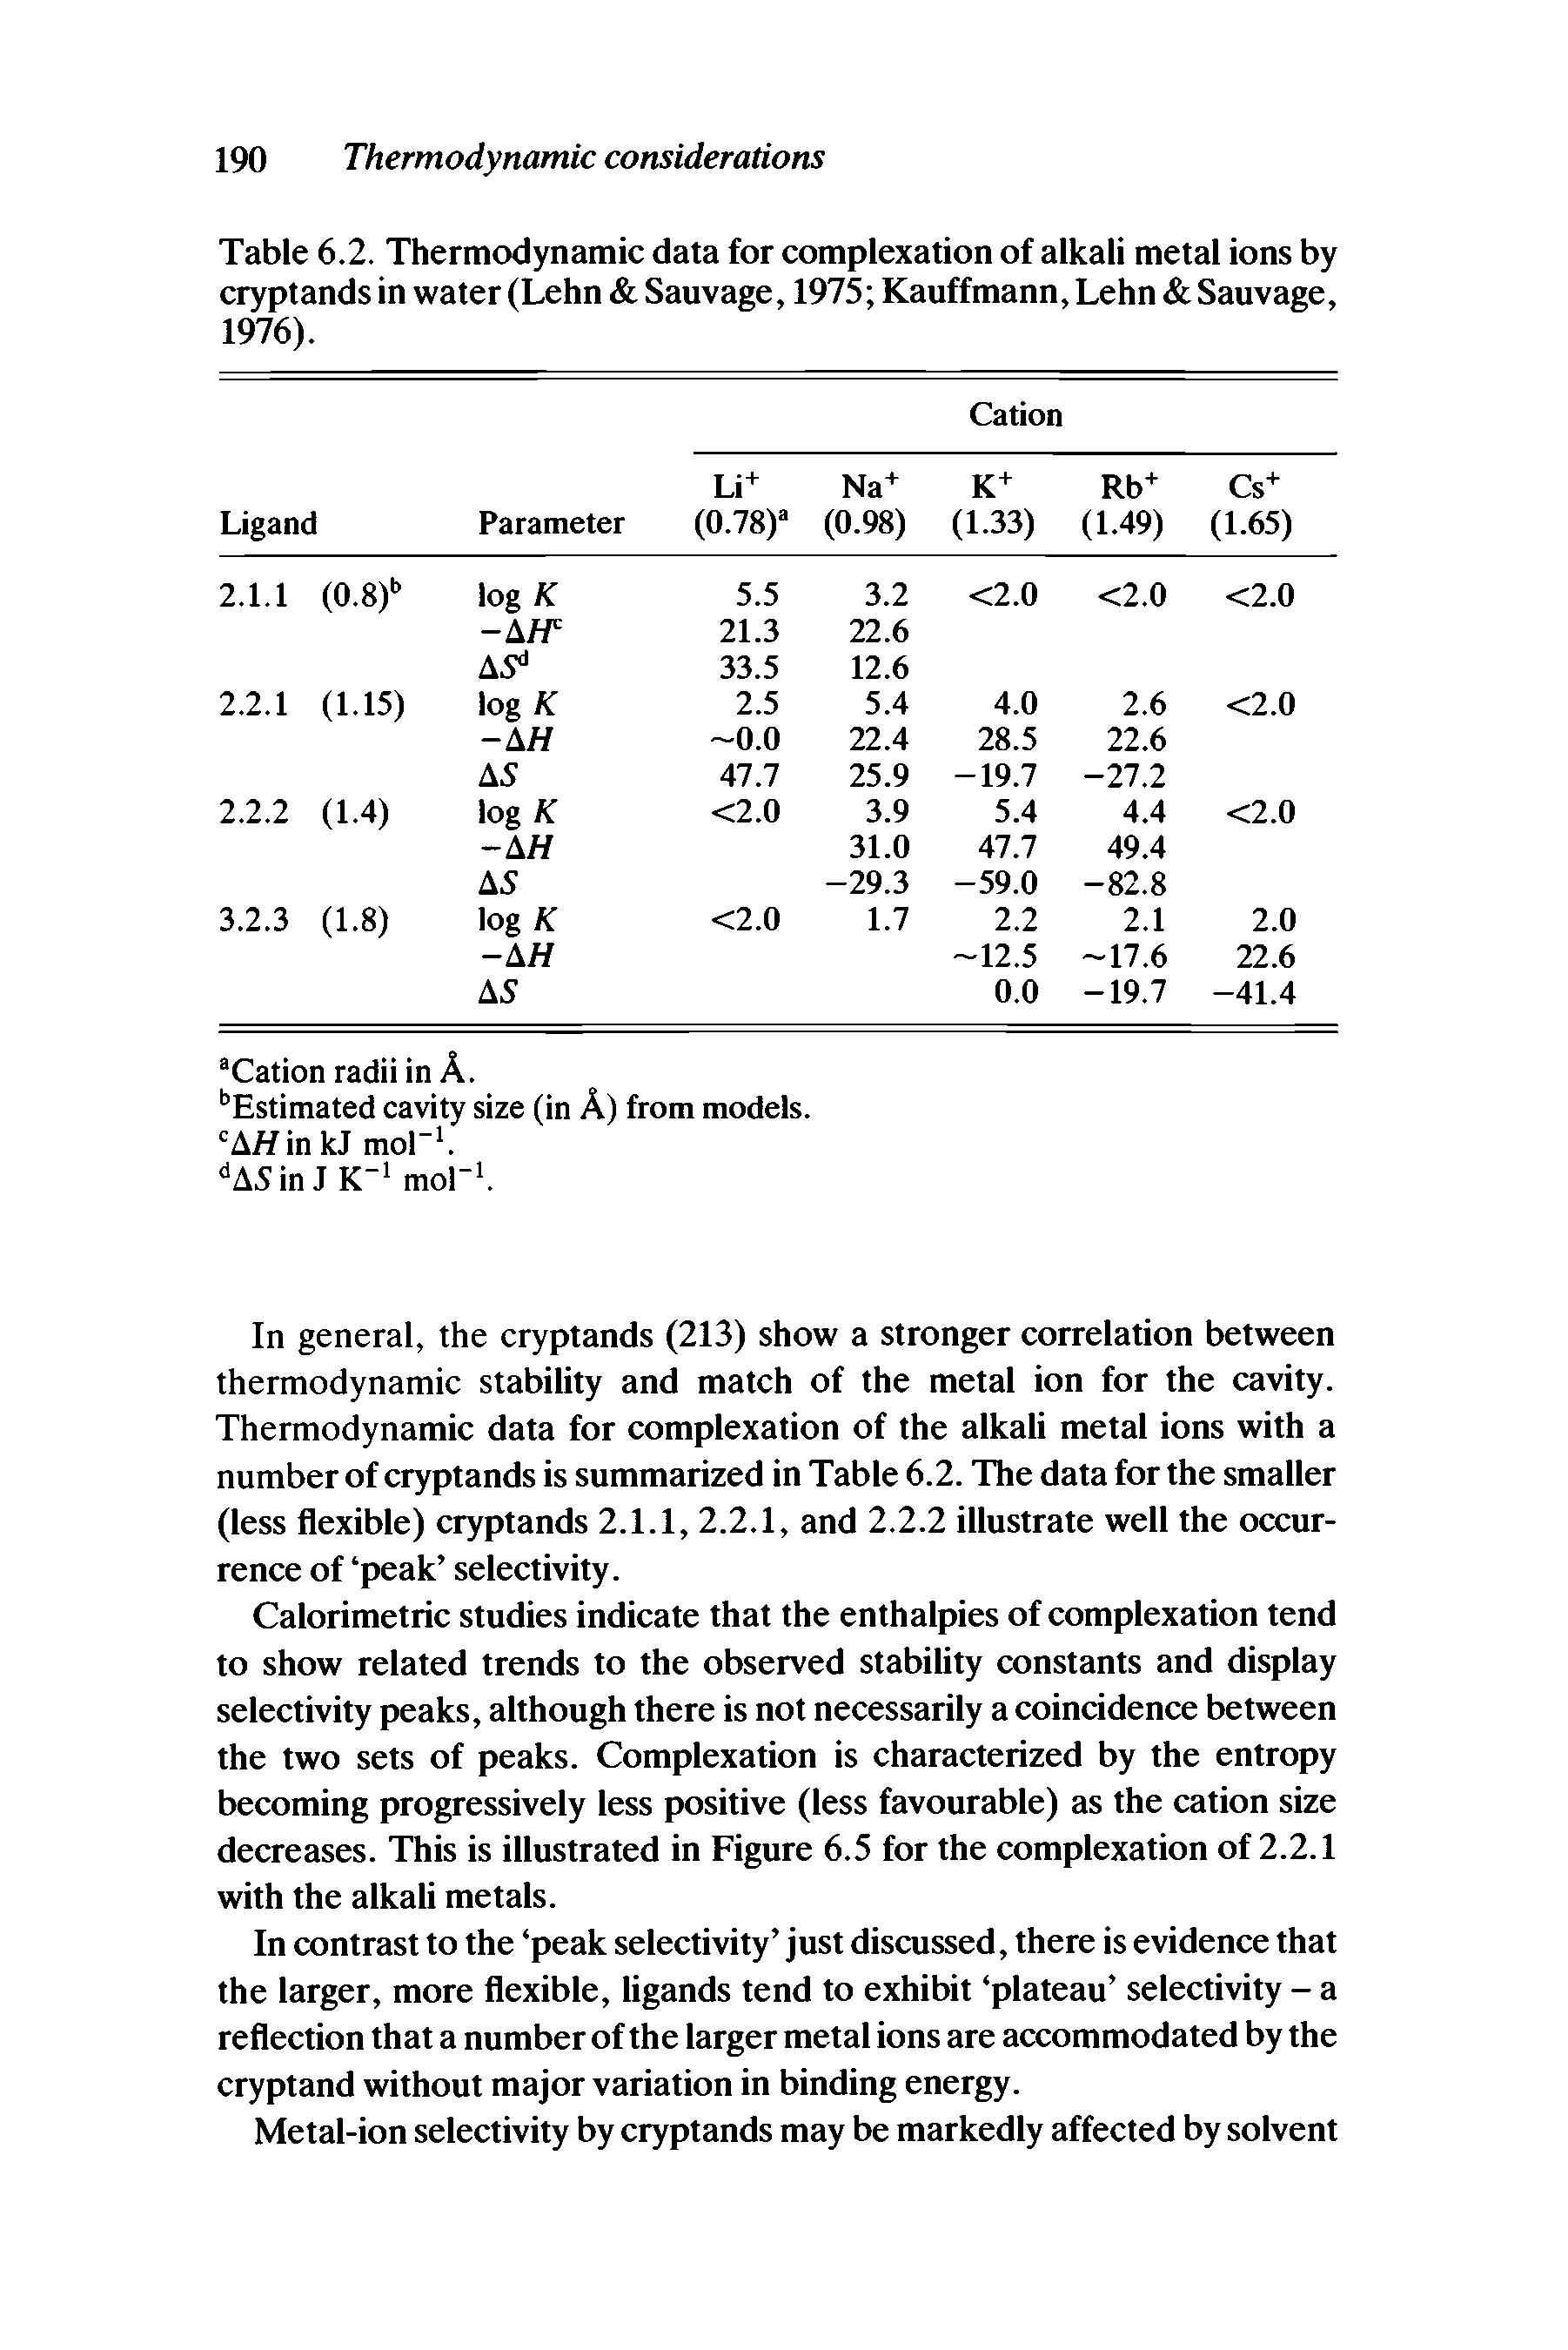 Table 6.2. Thermodynamic data for complexation of alkali metal ions by cryptands in water (Lehn Sauvage, 1975 Kauffmann, Lehn Sauvage, 1976).